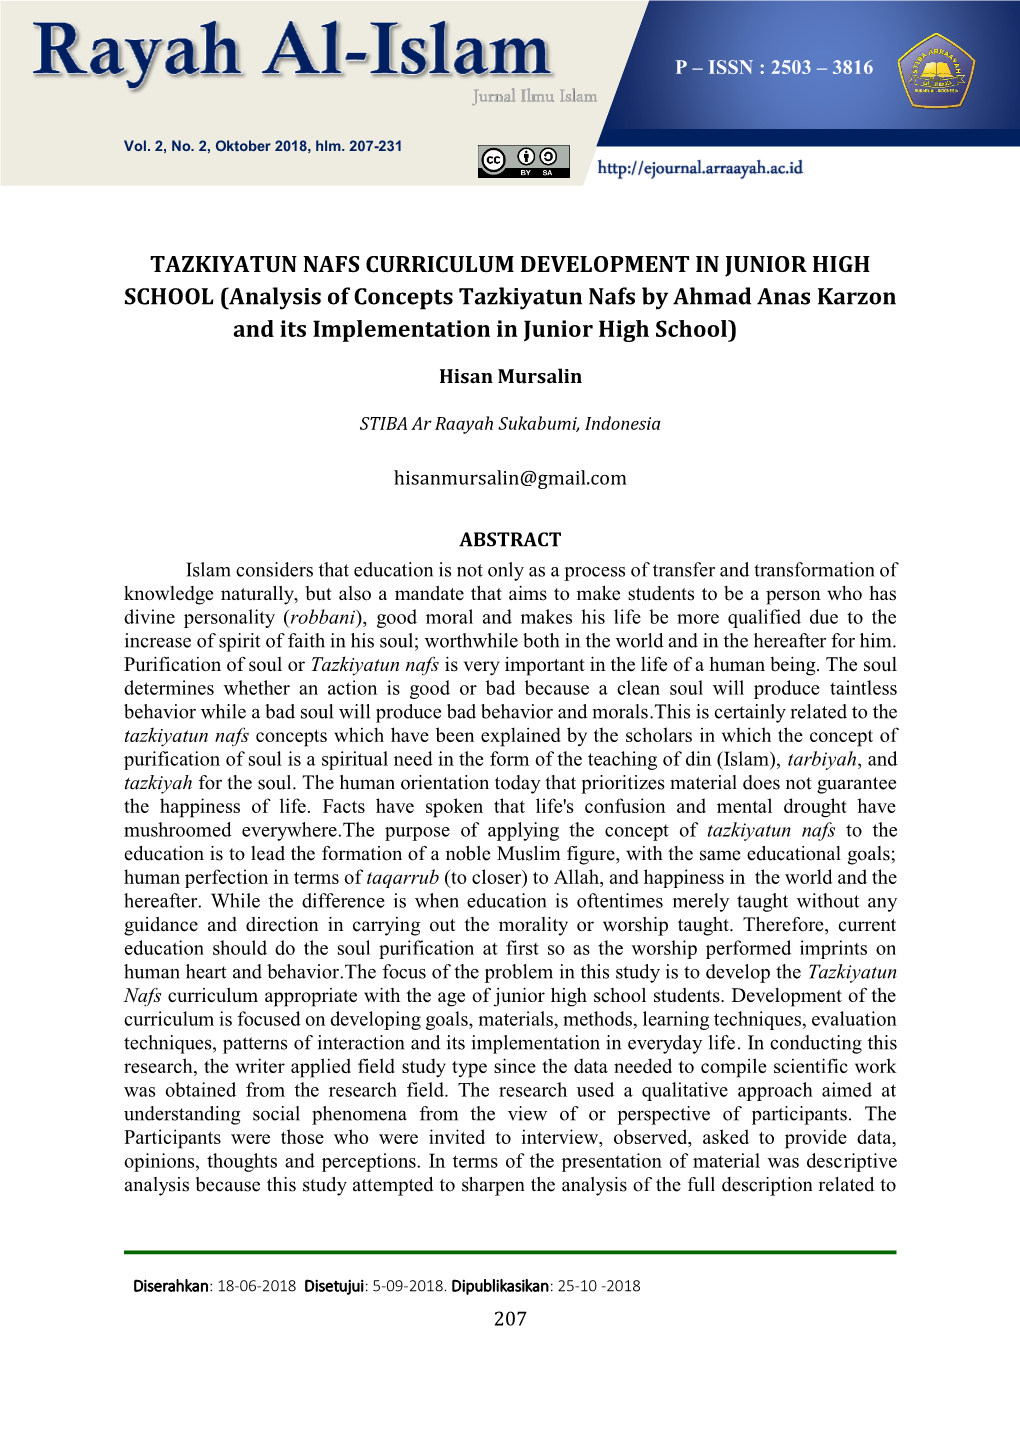 Analysis of Concepts Tazkiyatun Nafs by Ahmad Anas Karzon and Its Implementation in Junior High School)